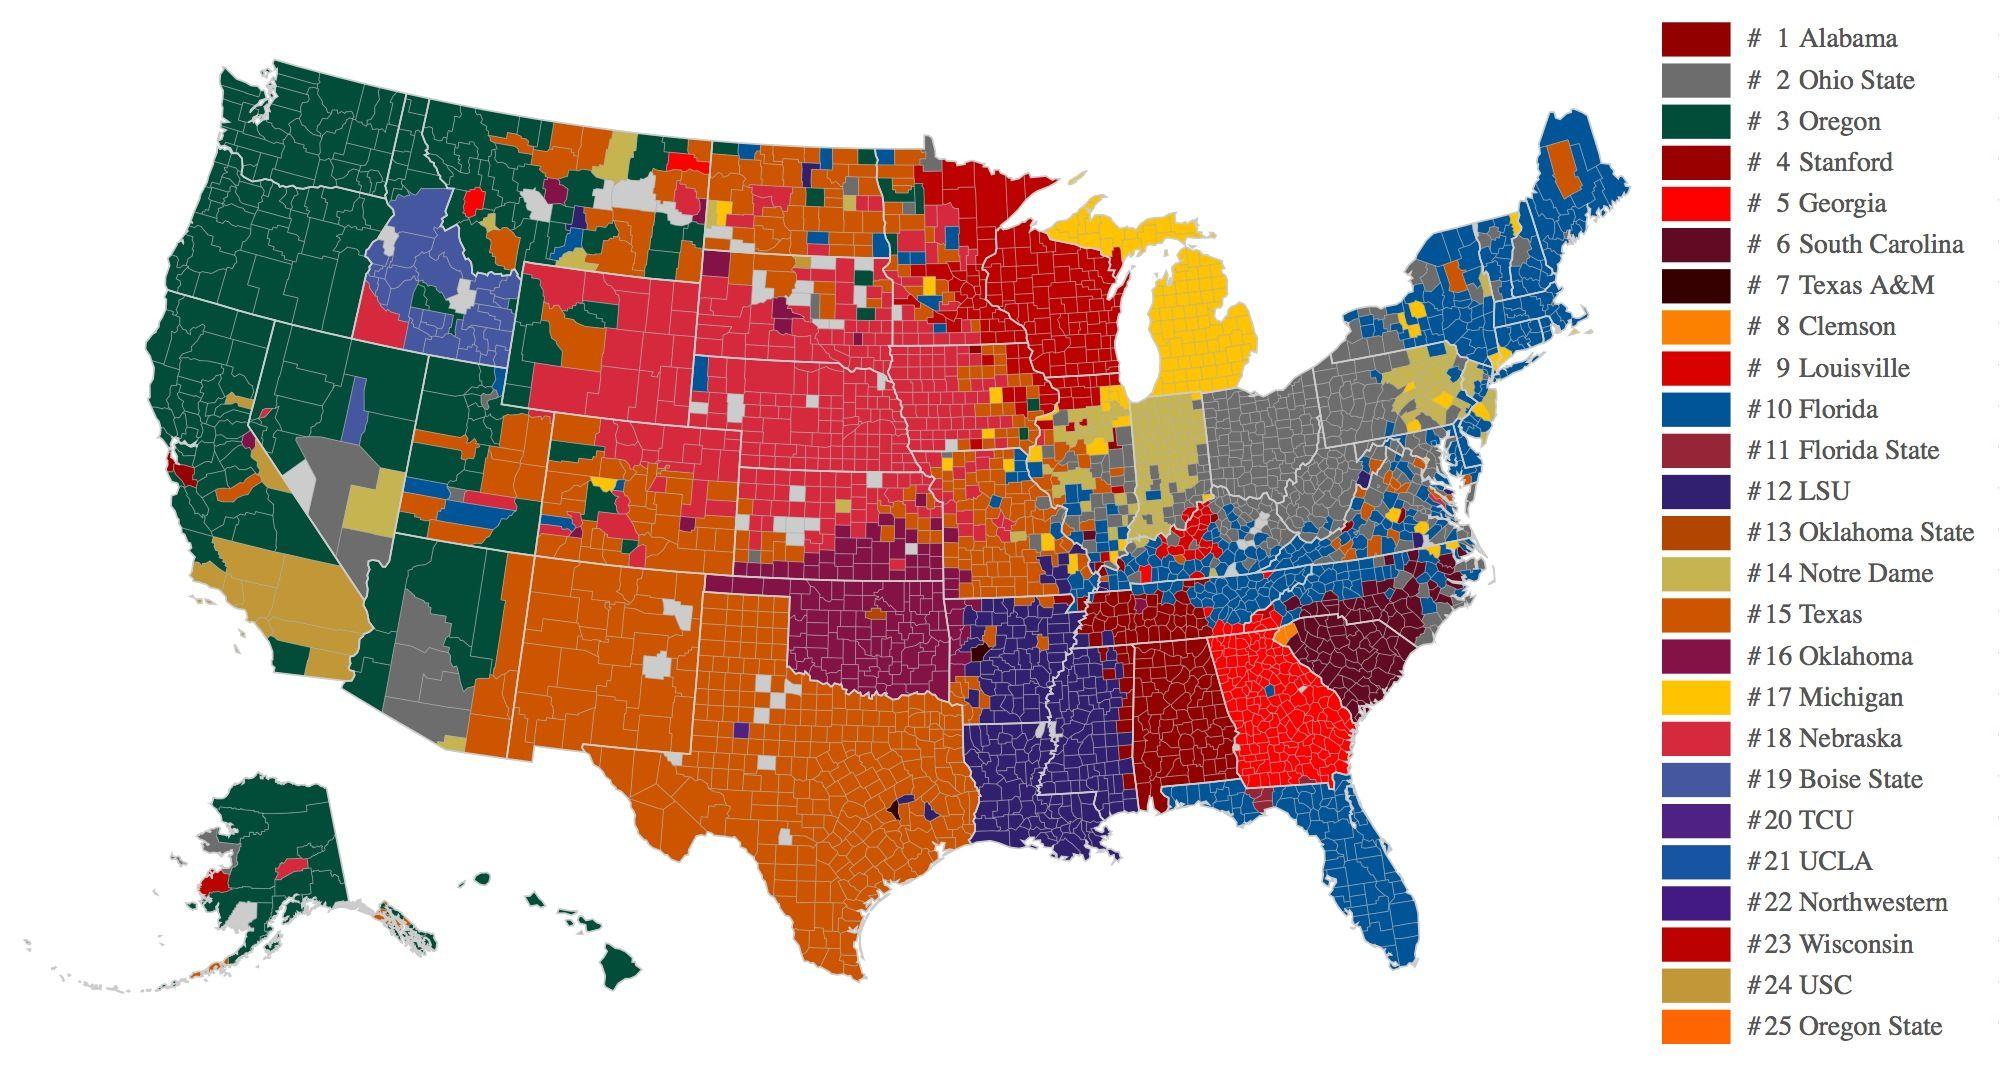 Most Popular College Logo - Facebook Data Now Give Us The Best Map Of College Football Fandom